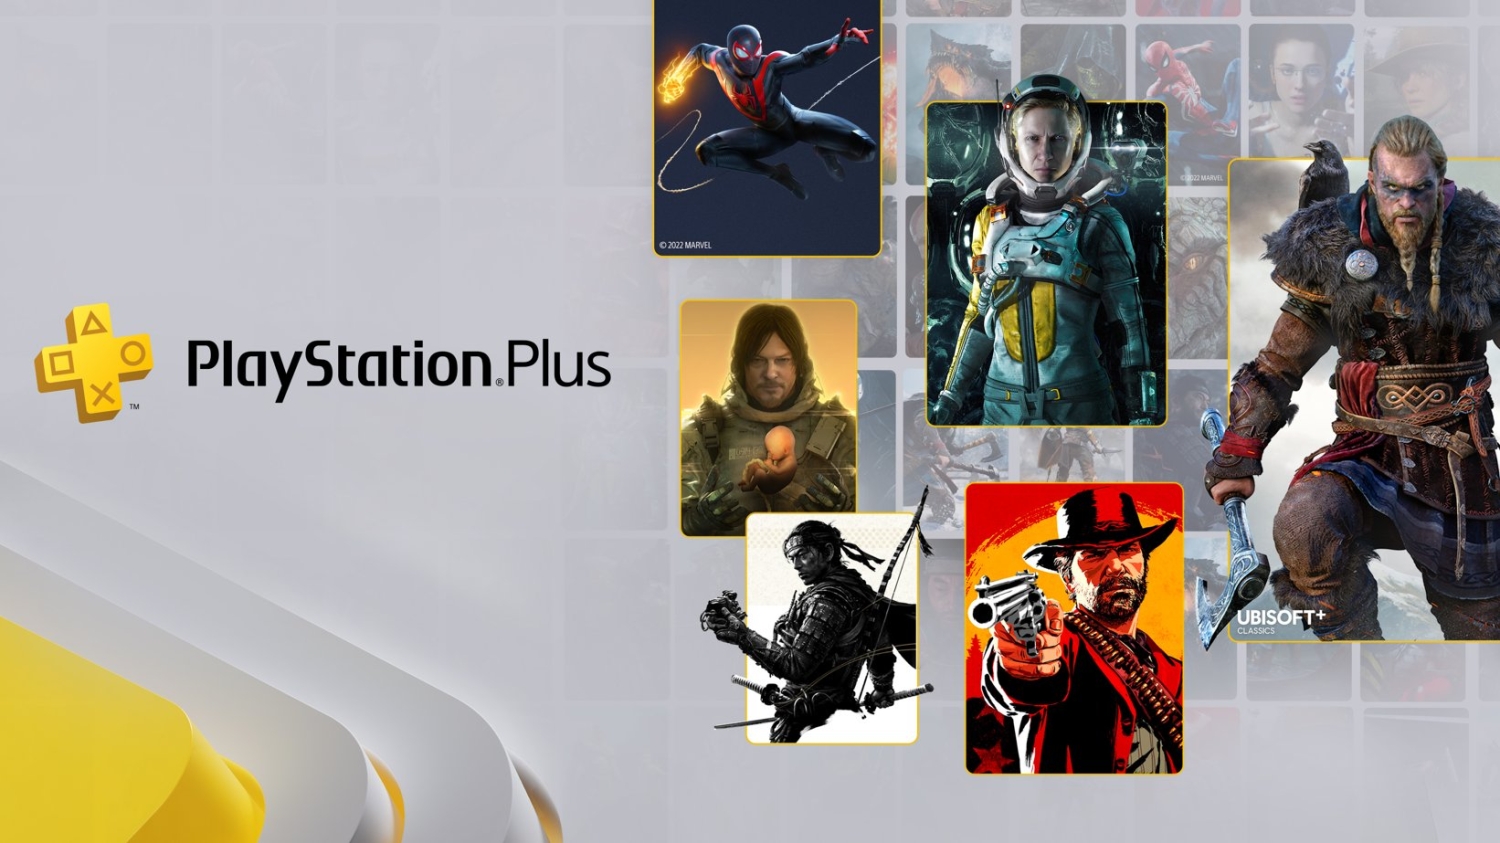 Sony: Game Pass leads PlayStation Plus significantly with 29 million  subscribers